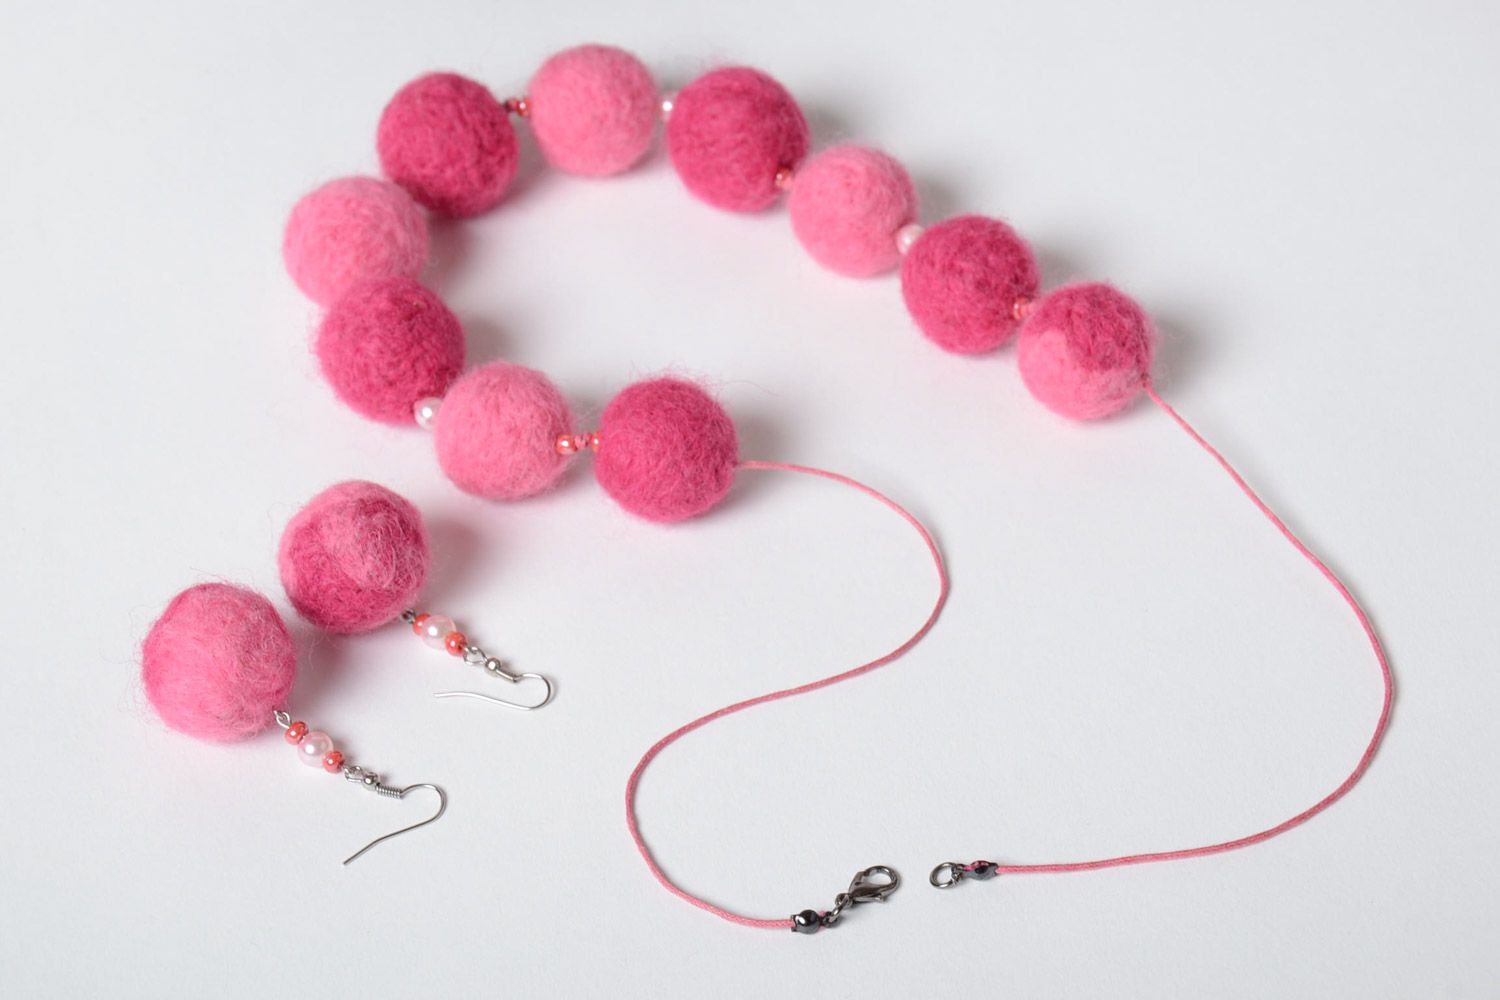 Handmade felted wool jewelry set 2 items pink ball necklace and earrings photo 4